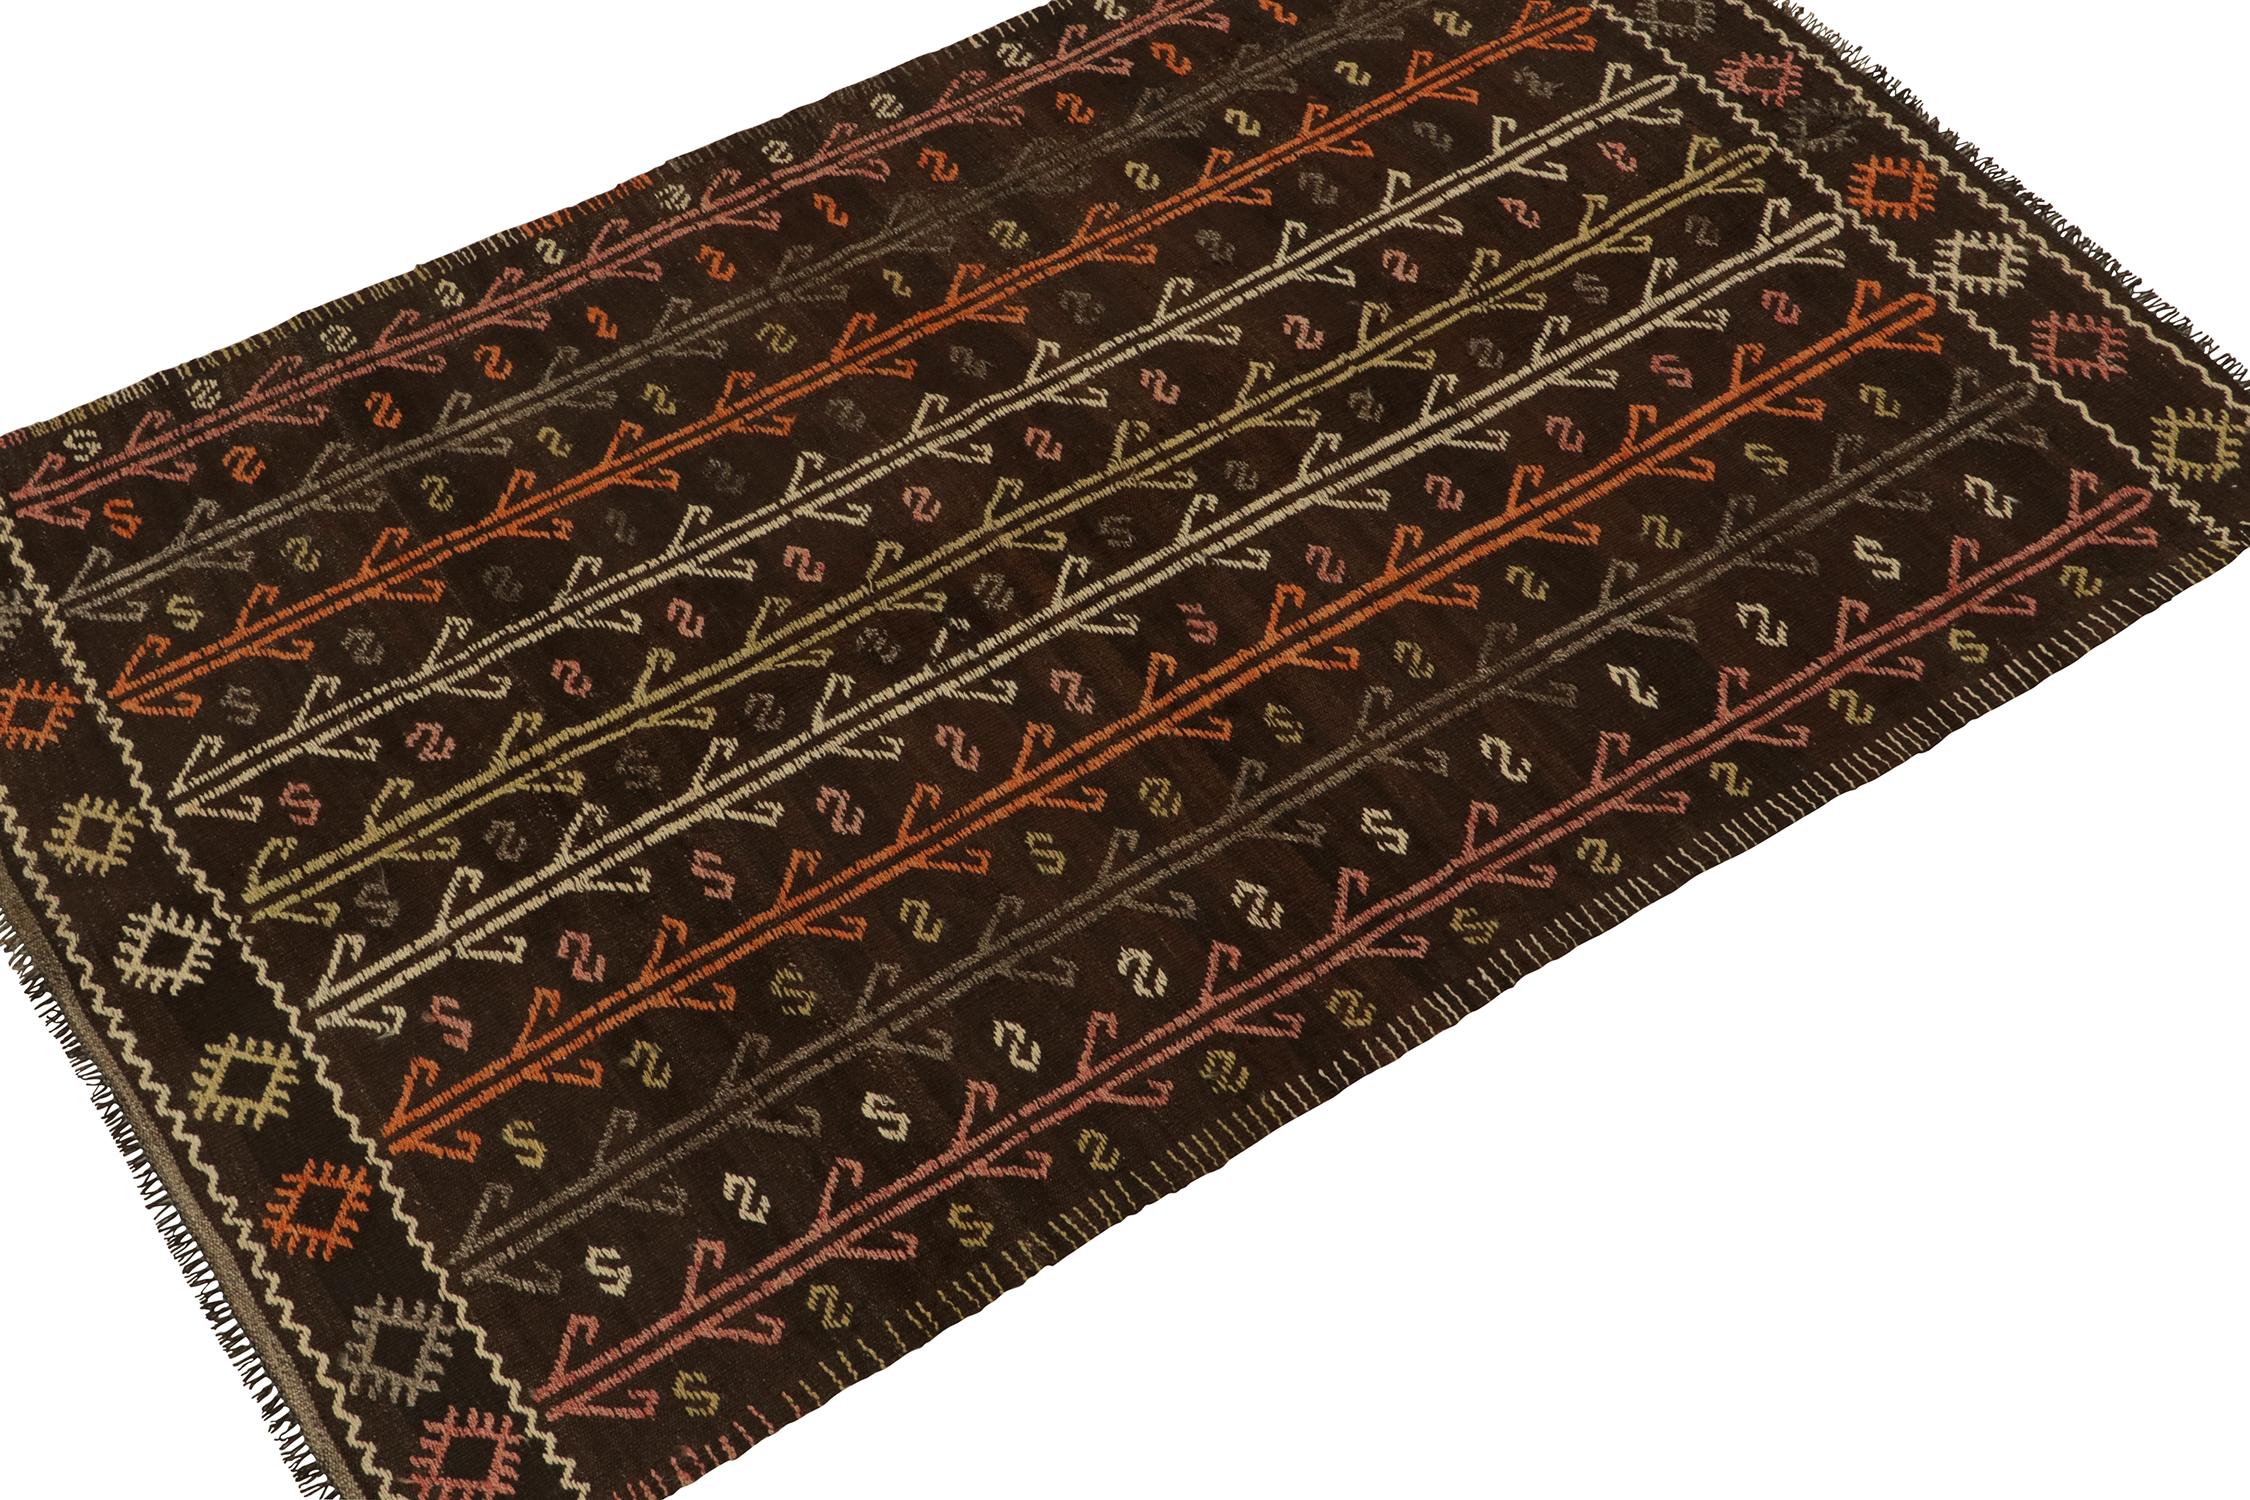 Originating from Turkey circa 1950-1960, a vintage Chaput style kilim rug connoting elaborate tribal sensibilities. Handwoven in wool, the piece exhibits an unusual play of vibrant embroidery atop a rich brown background seldom seen outside this and